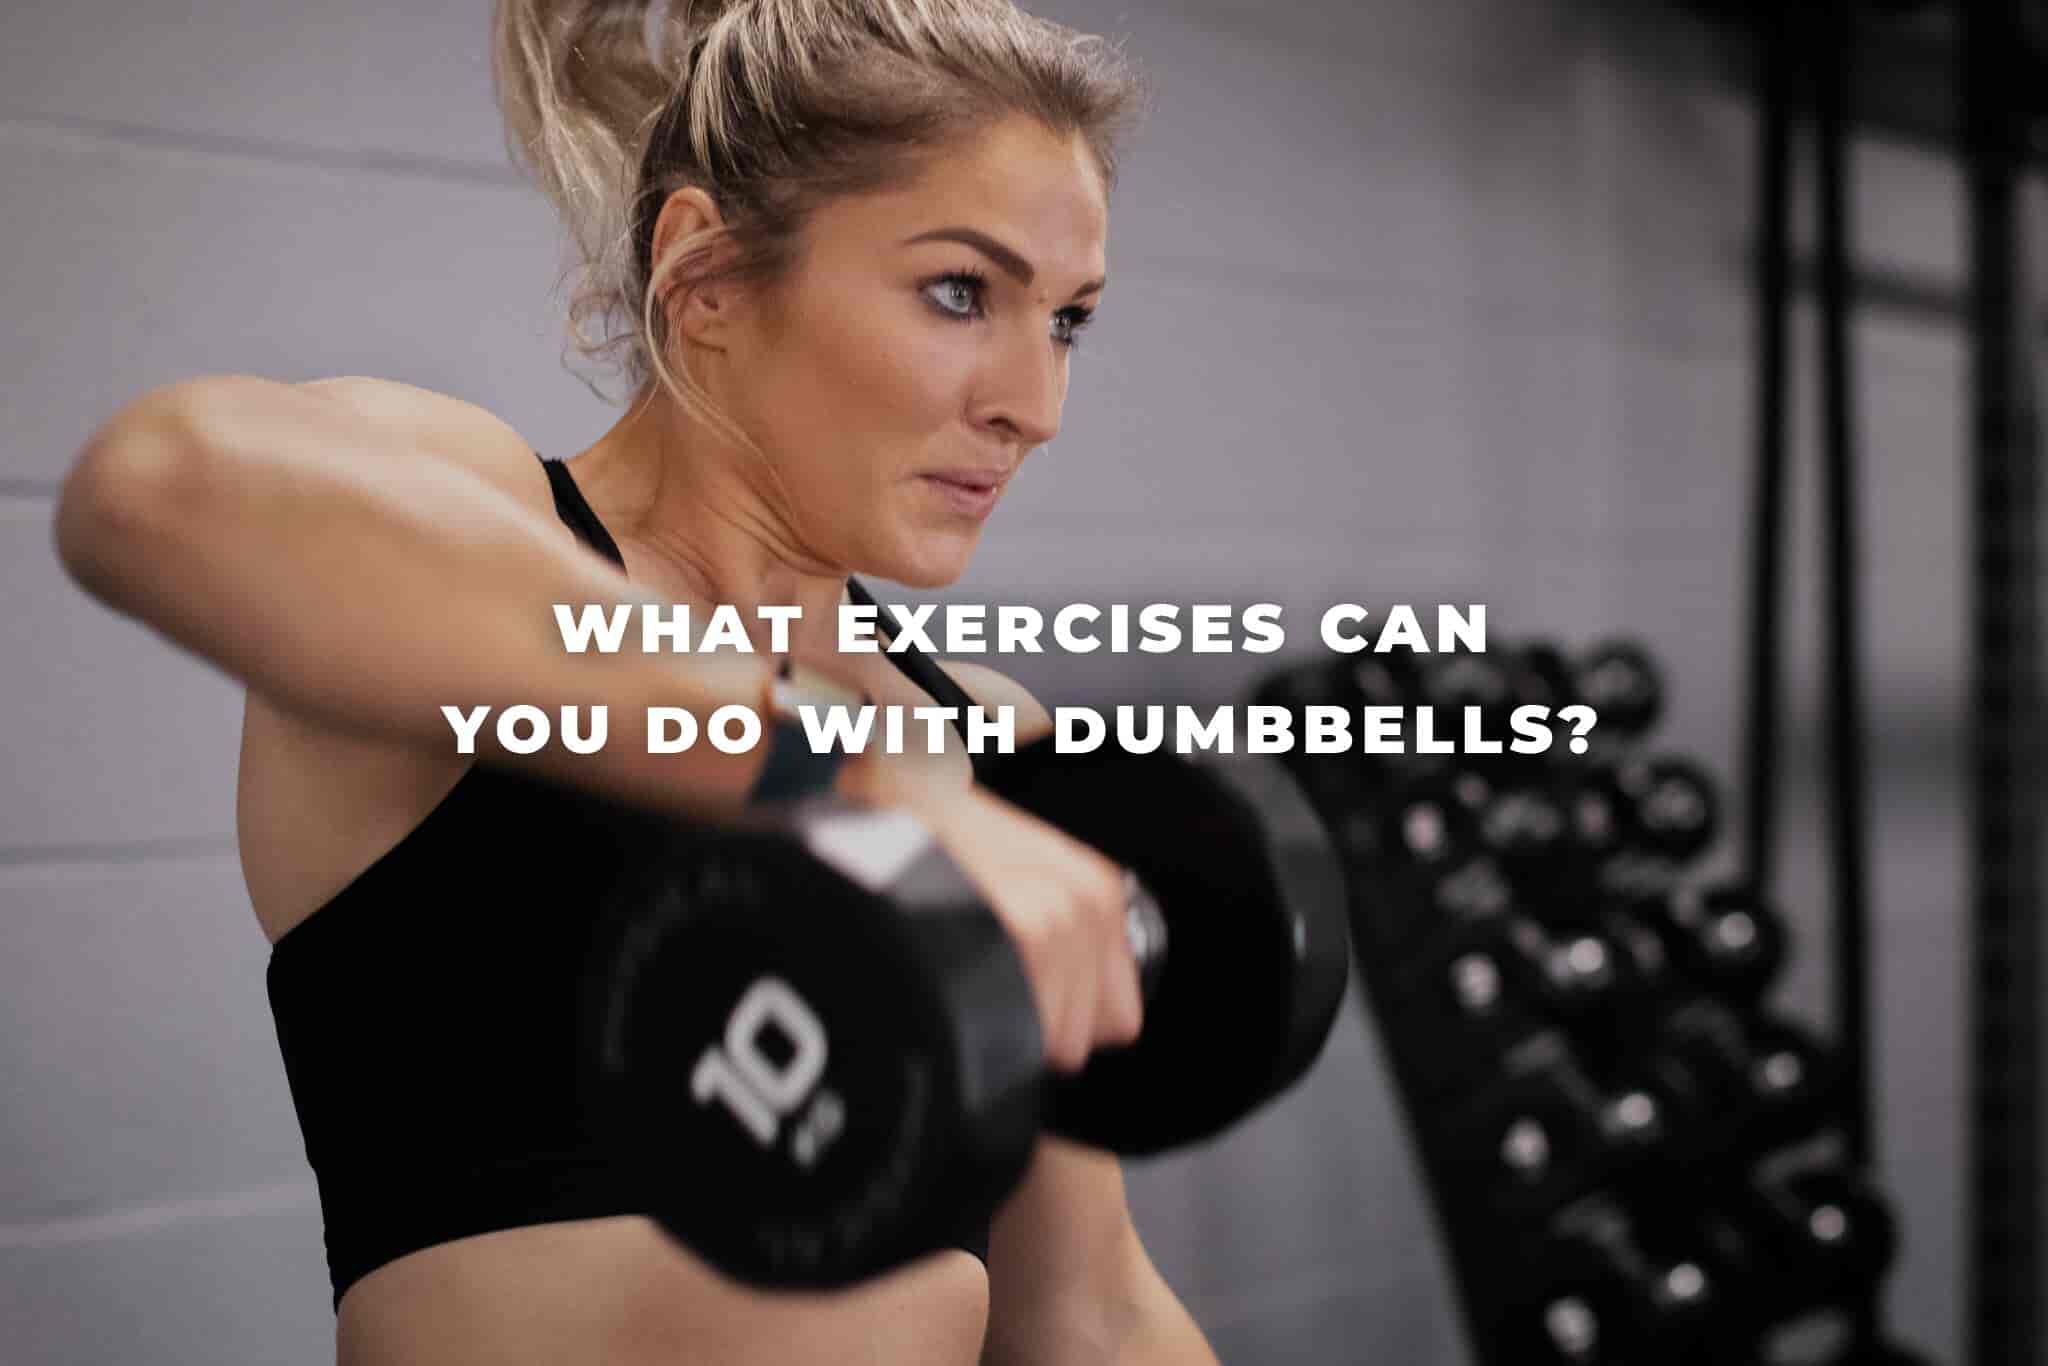 What exercises can you do with dumbbells?